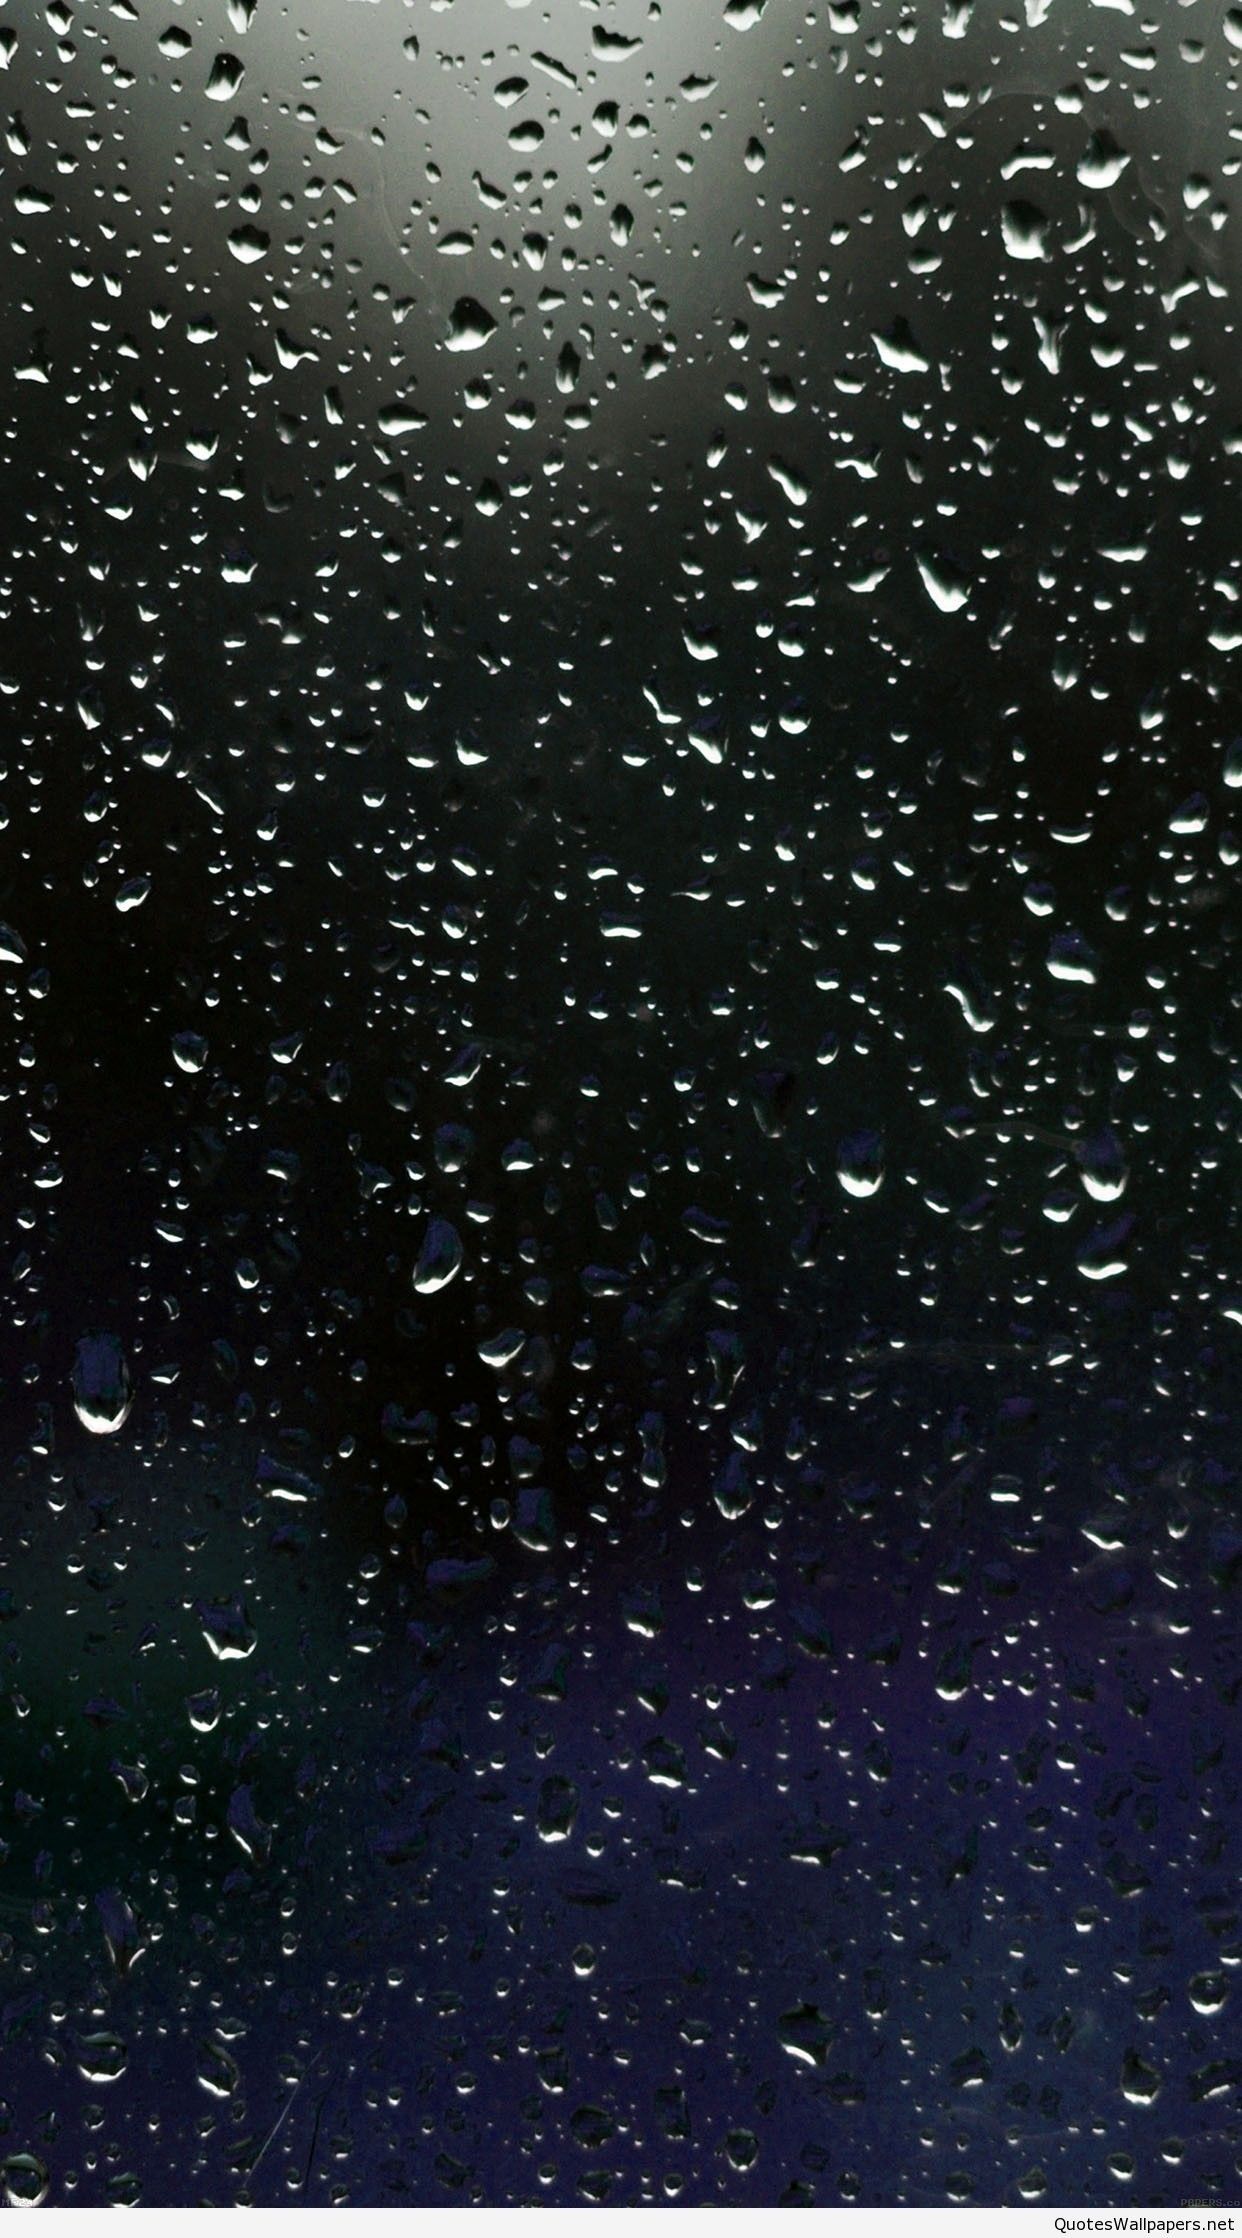 A window with raindrops on it and the sky - Rain